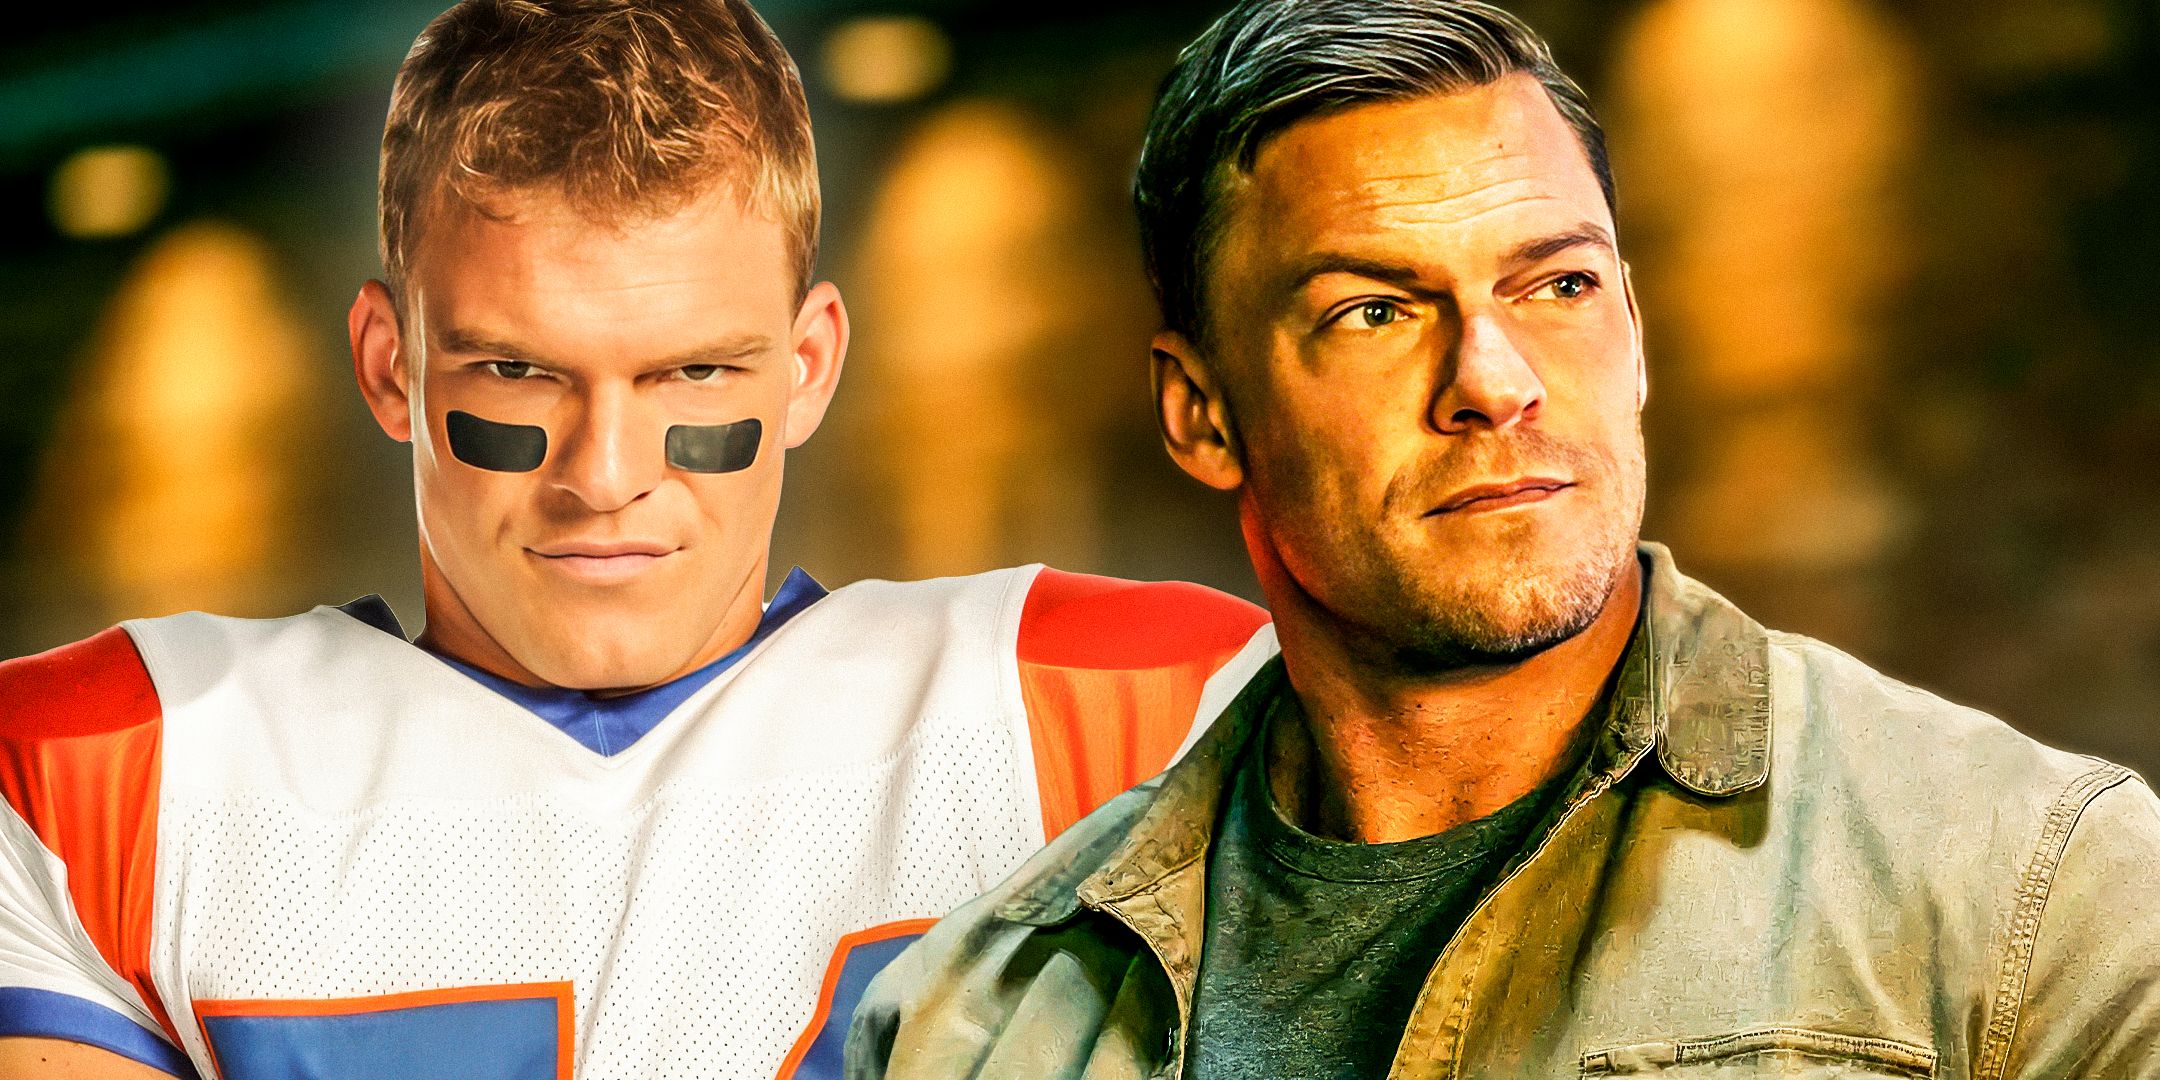 Alan Ritcher as Thad Castle in Blue Mountain State and Jack Reacher in Reacher.